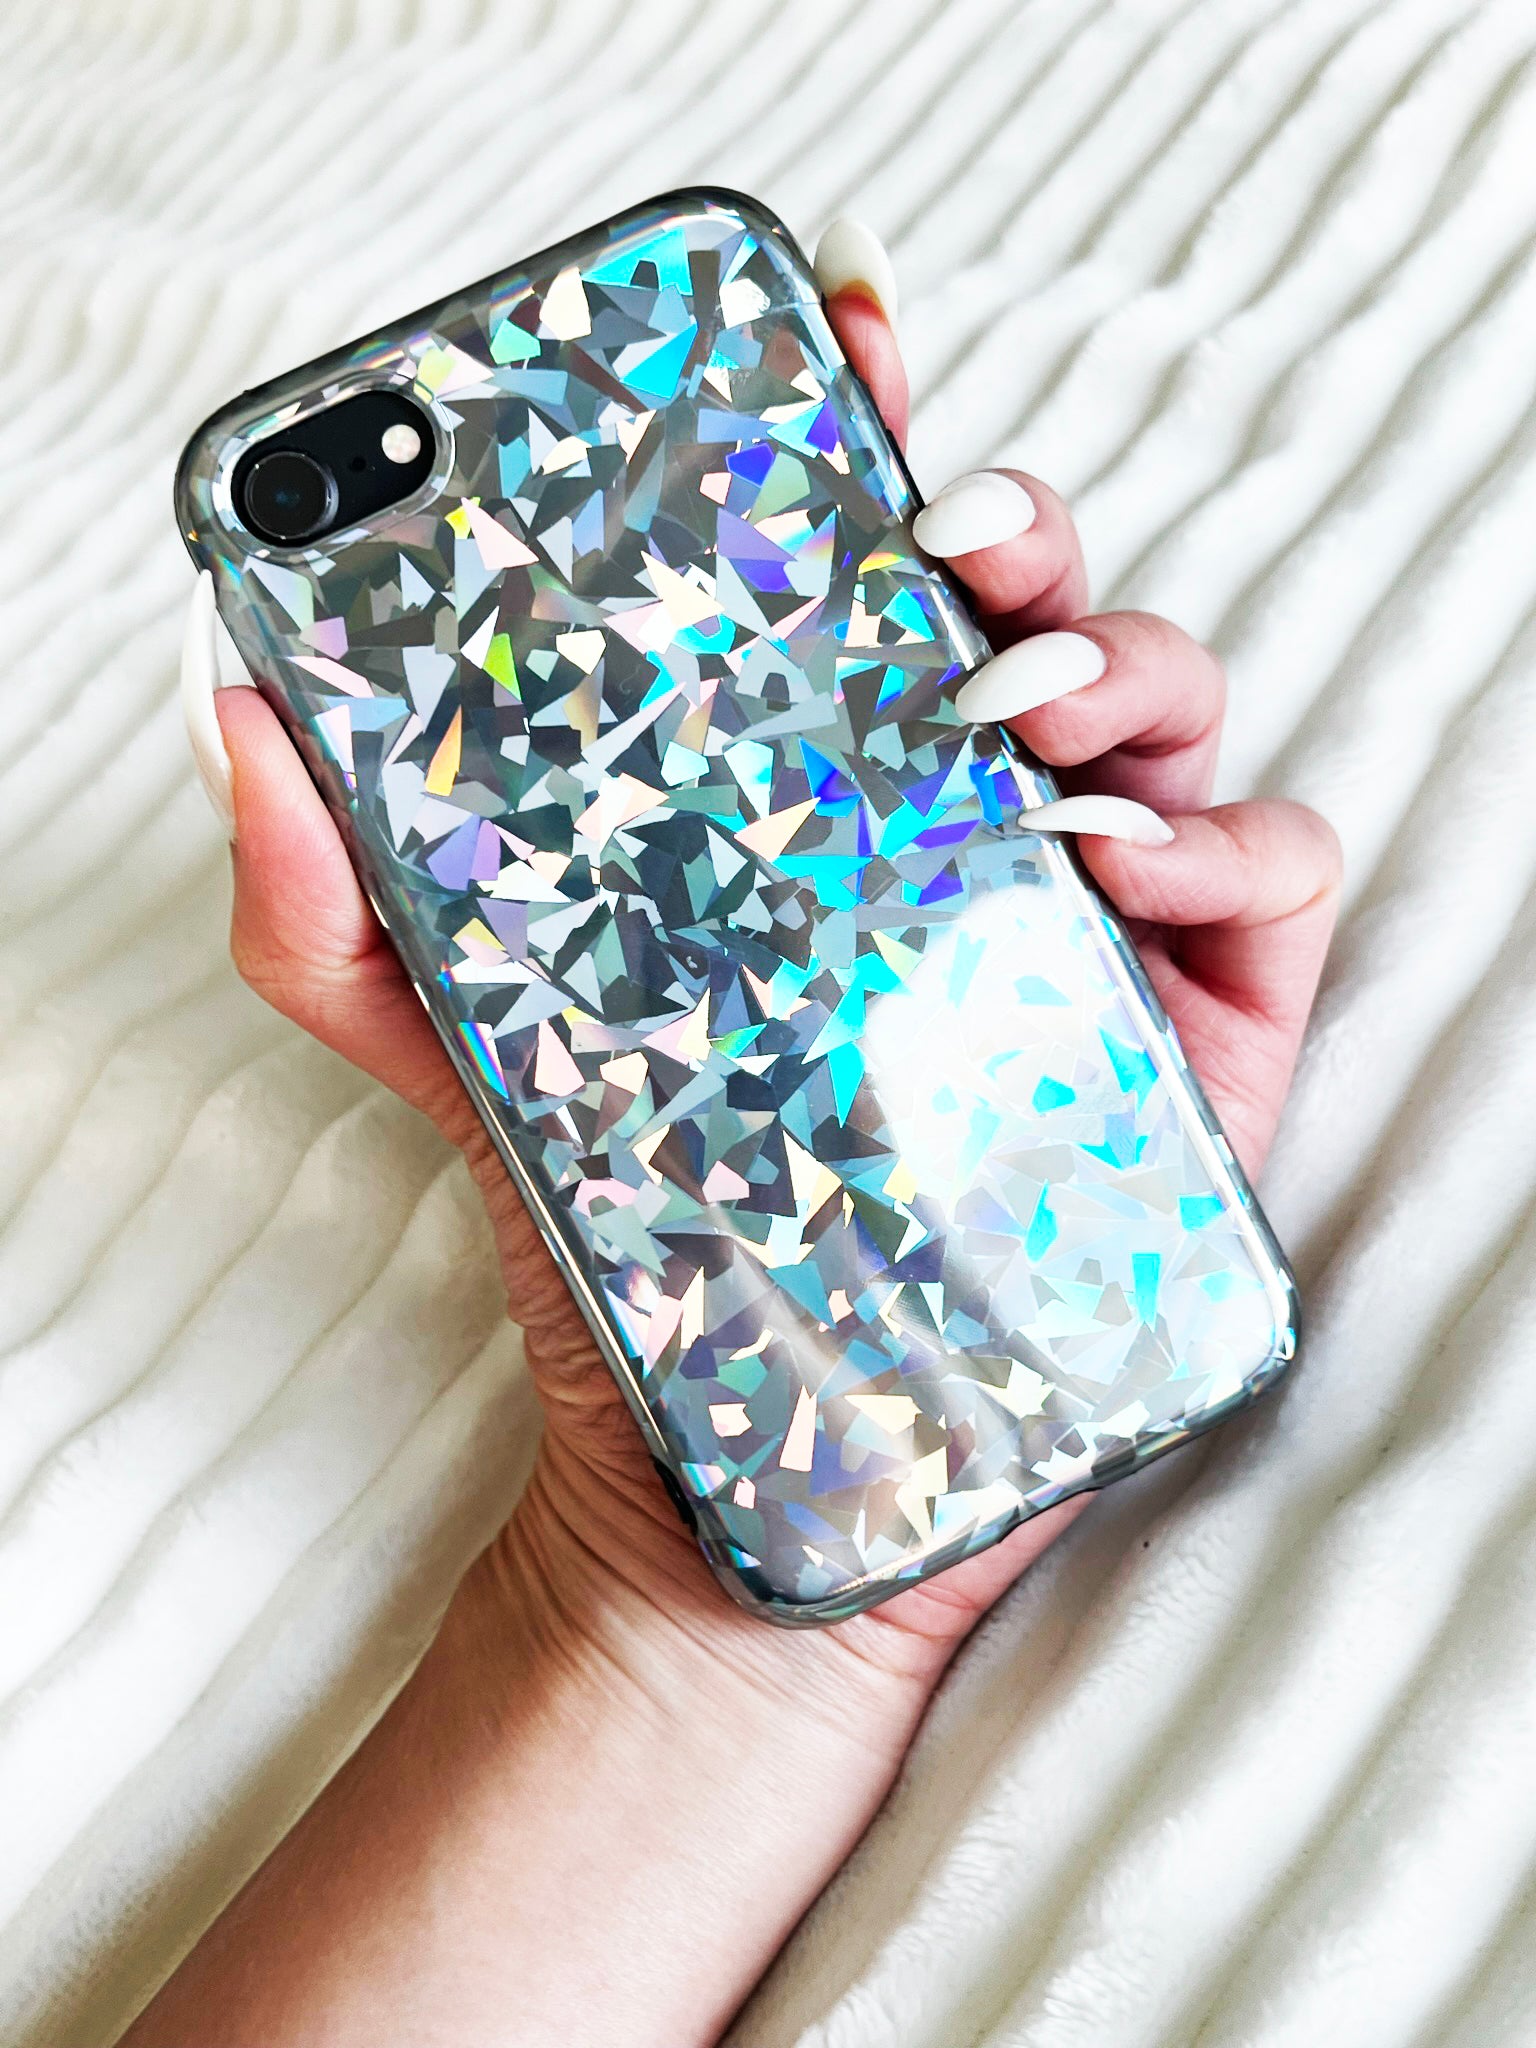 Holding up KokoLoveCo Laser Focus iPhone Case super shiny and colorful, on top of a white fluffy texture blanket